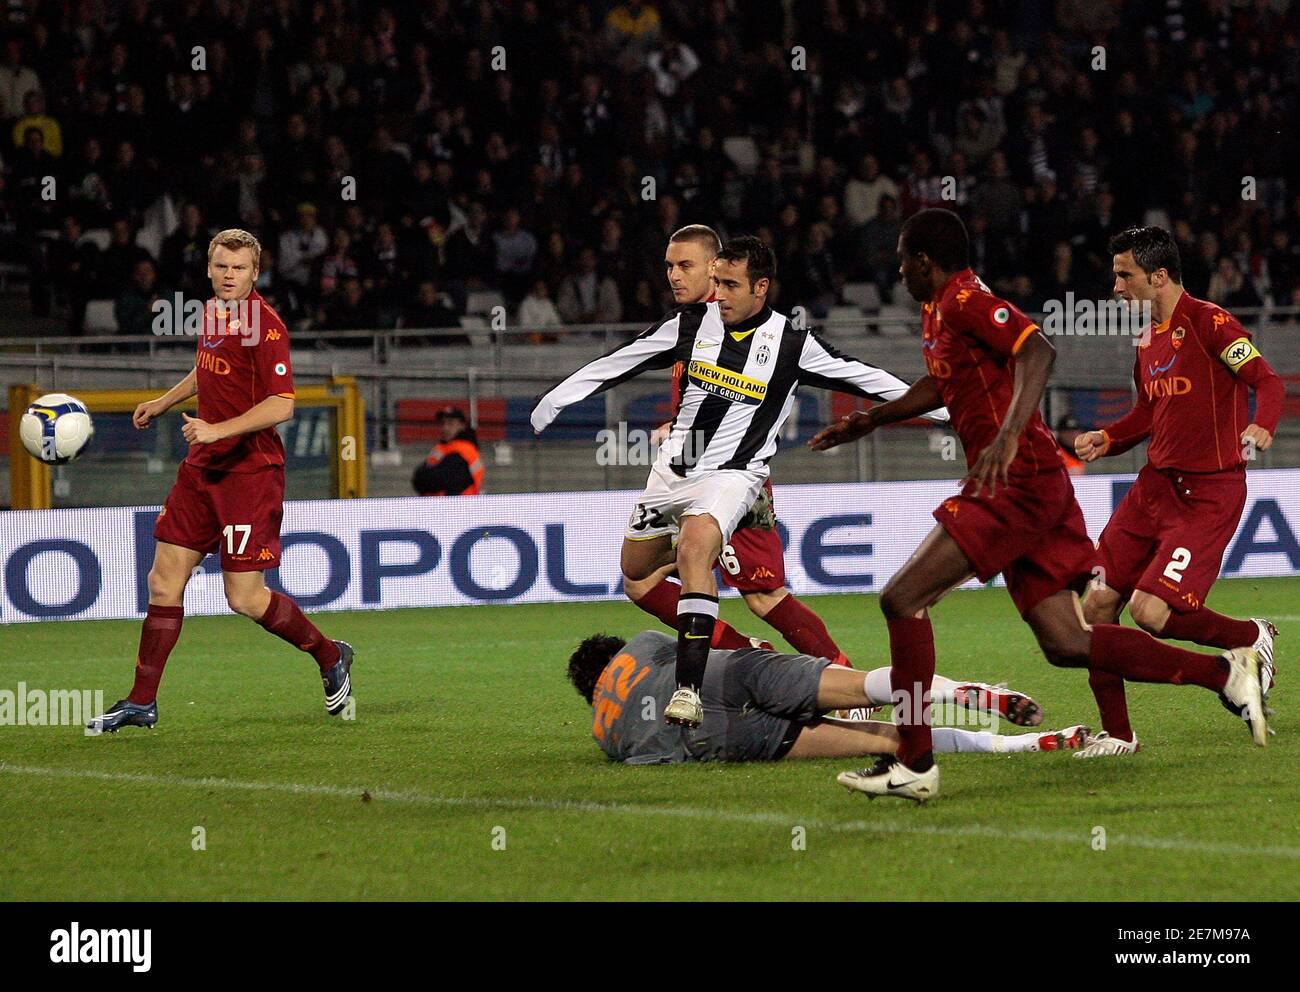 Juventus's Marco Marchionni (C) shoots to score the team's second goal against AS Roma during their Italian Serie A soccer match at the Olympic stadium in Turin November 1, 2008. REUTERS/Alessandro Garofalo (ITALY) Stock Photo